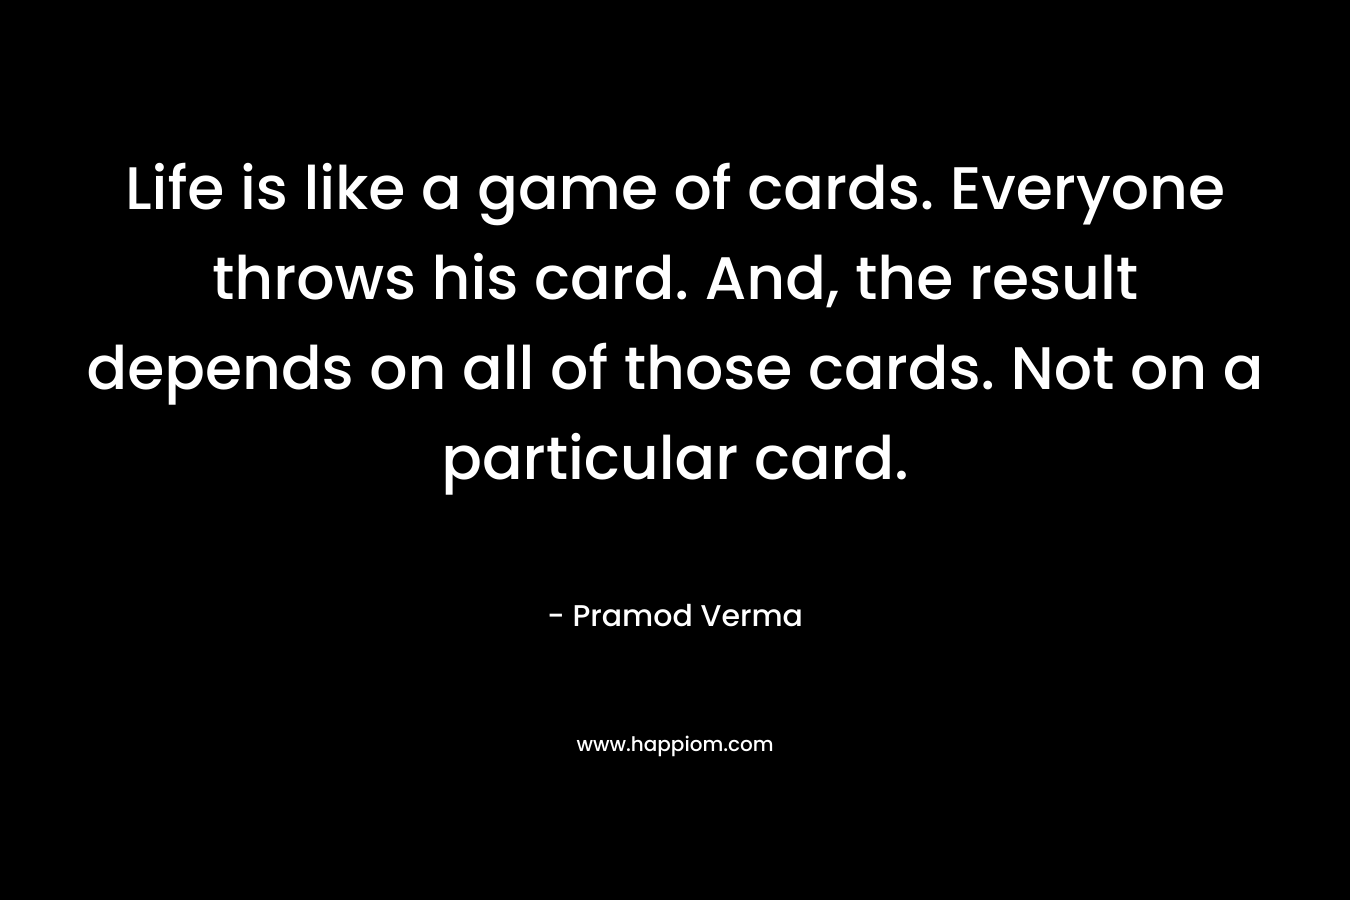 Life is like a game of cards. Everyone throws his card. And, the result depends on all of those cards. Not on a particular card.